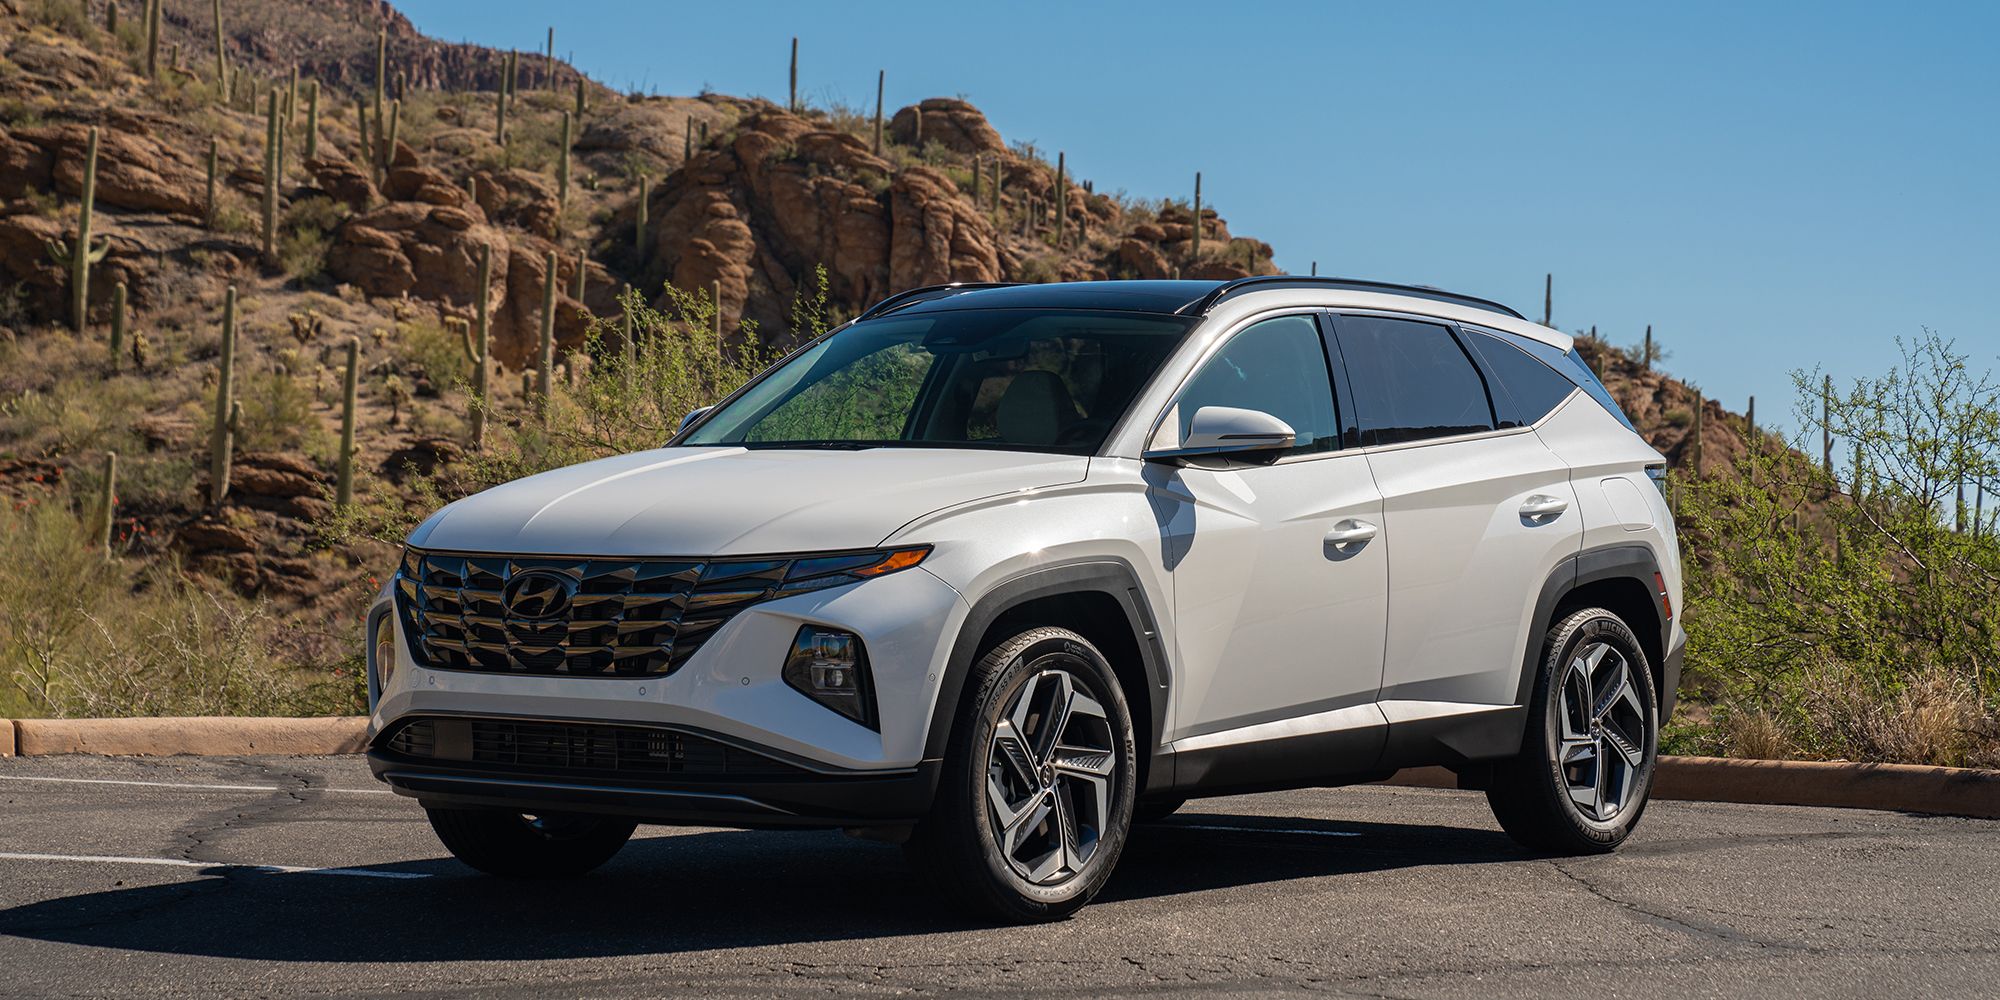 10 Things To Know Before Buying The 2022 Hyundai Tucson